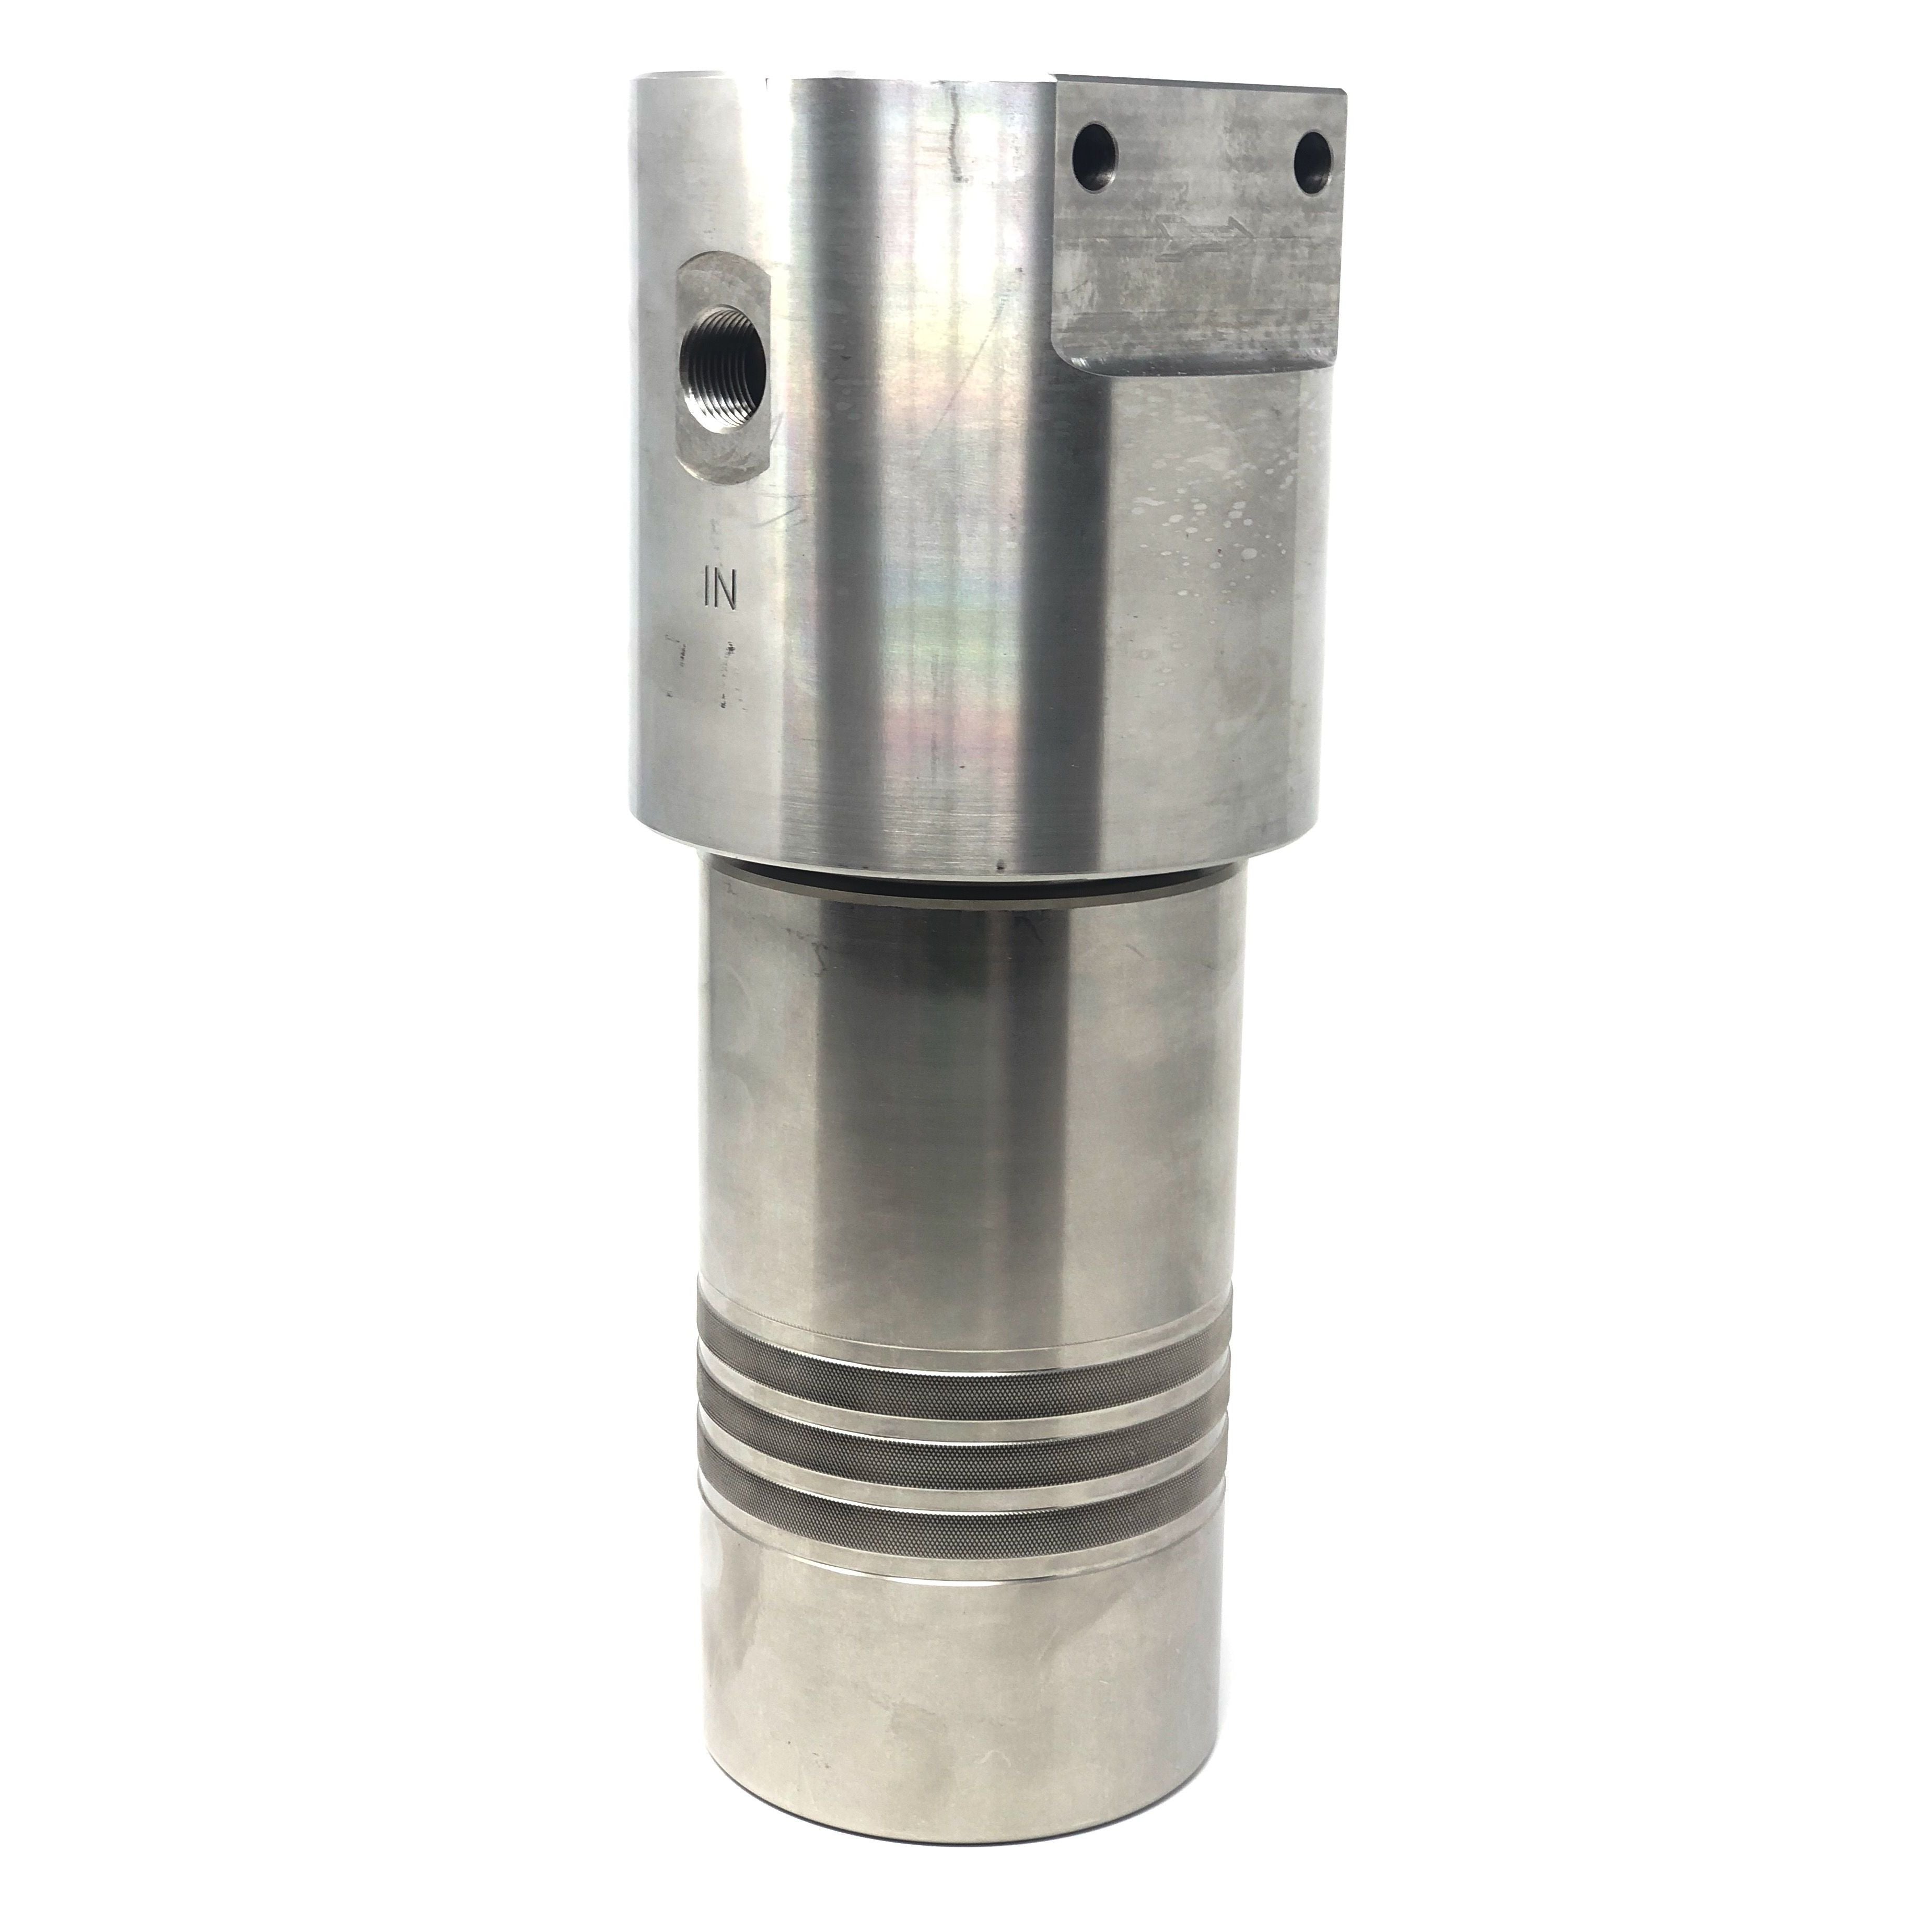 52S-2412S-3MDN : Chase Ultra High Pressure Inline Filter, 10000psi, #12 SAE (3/4"), 3 Micron, With Visual Indicator, No Bypass